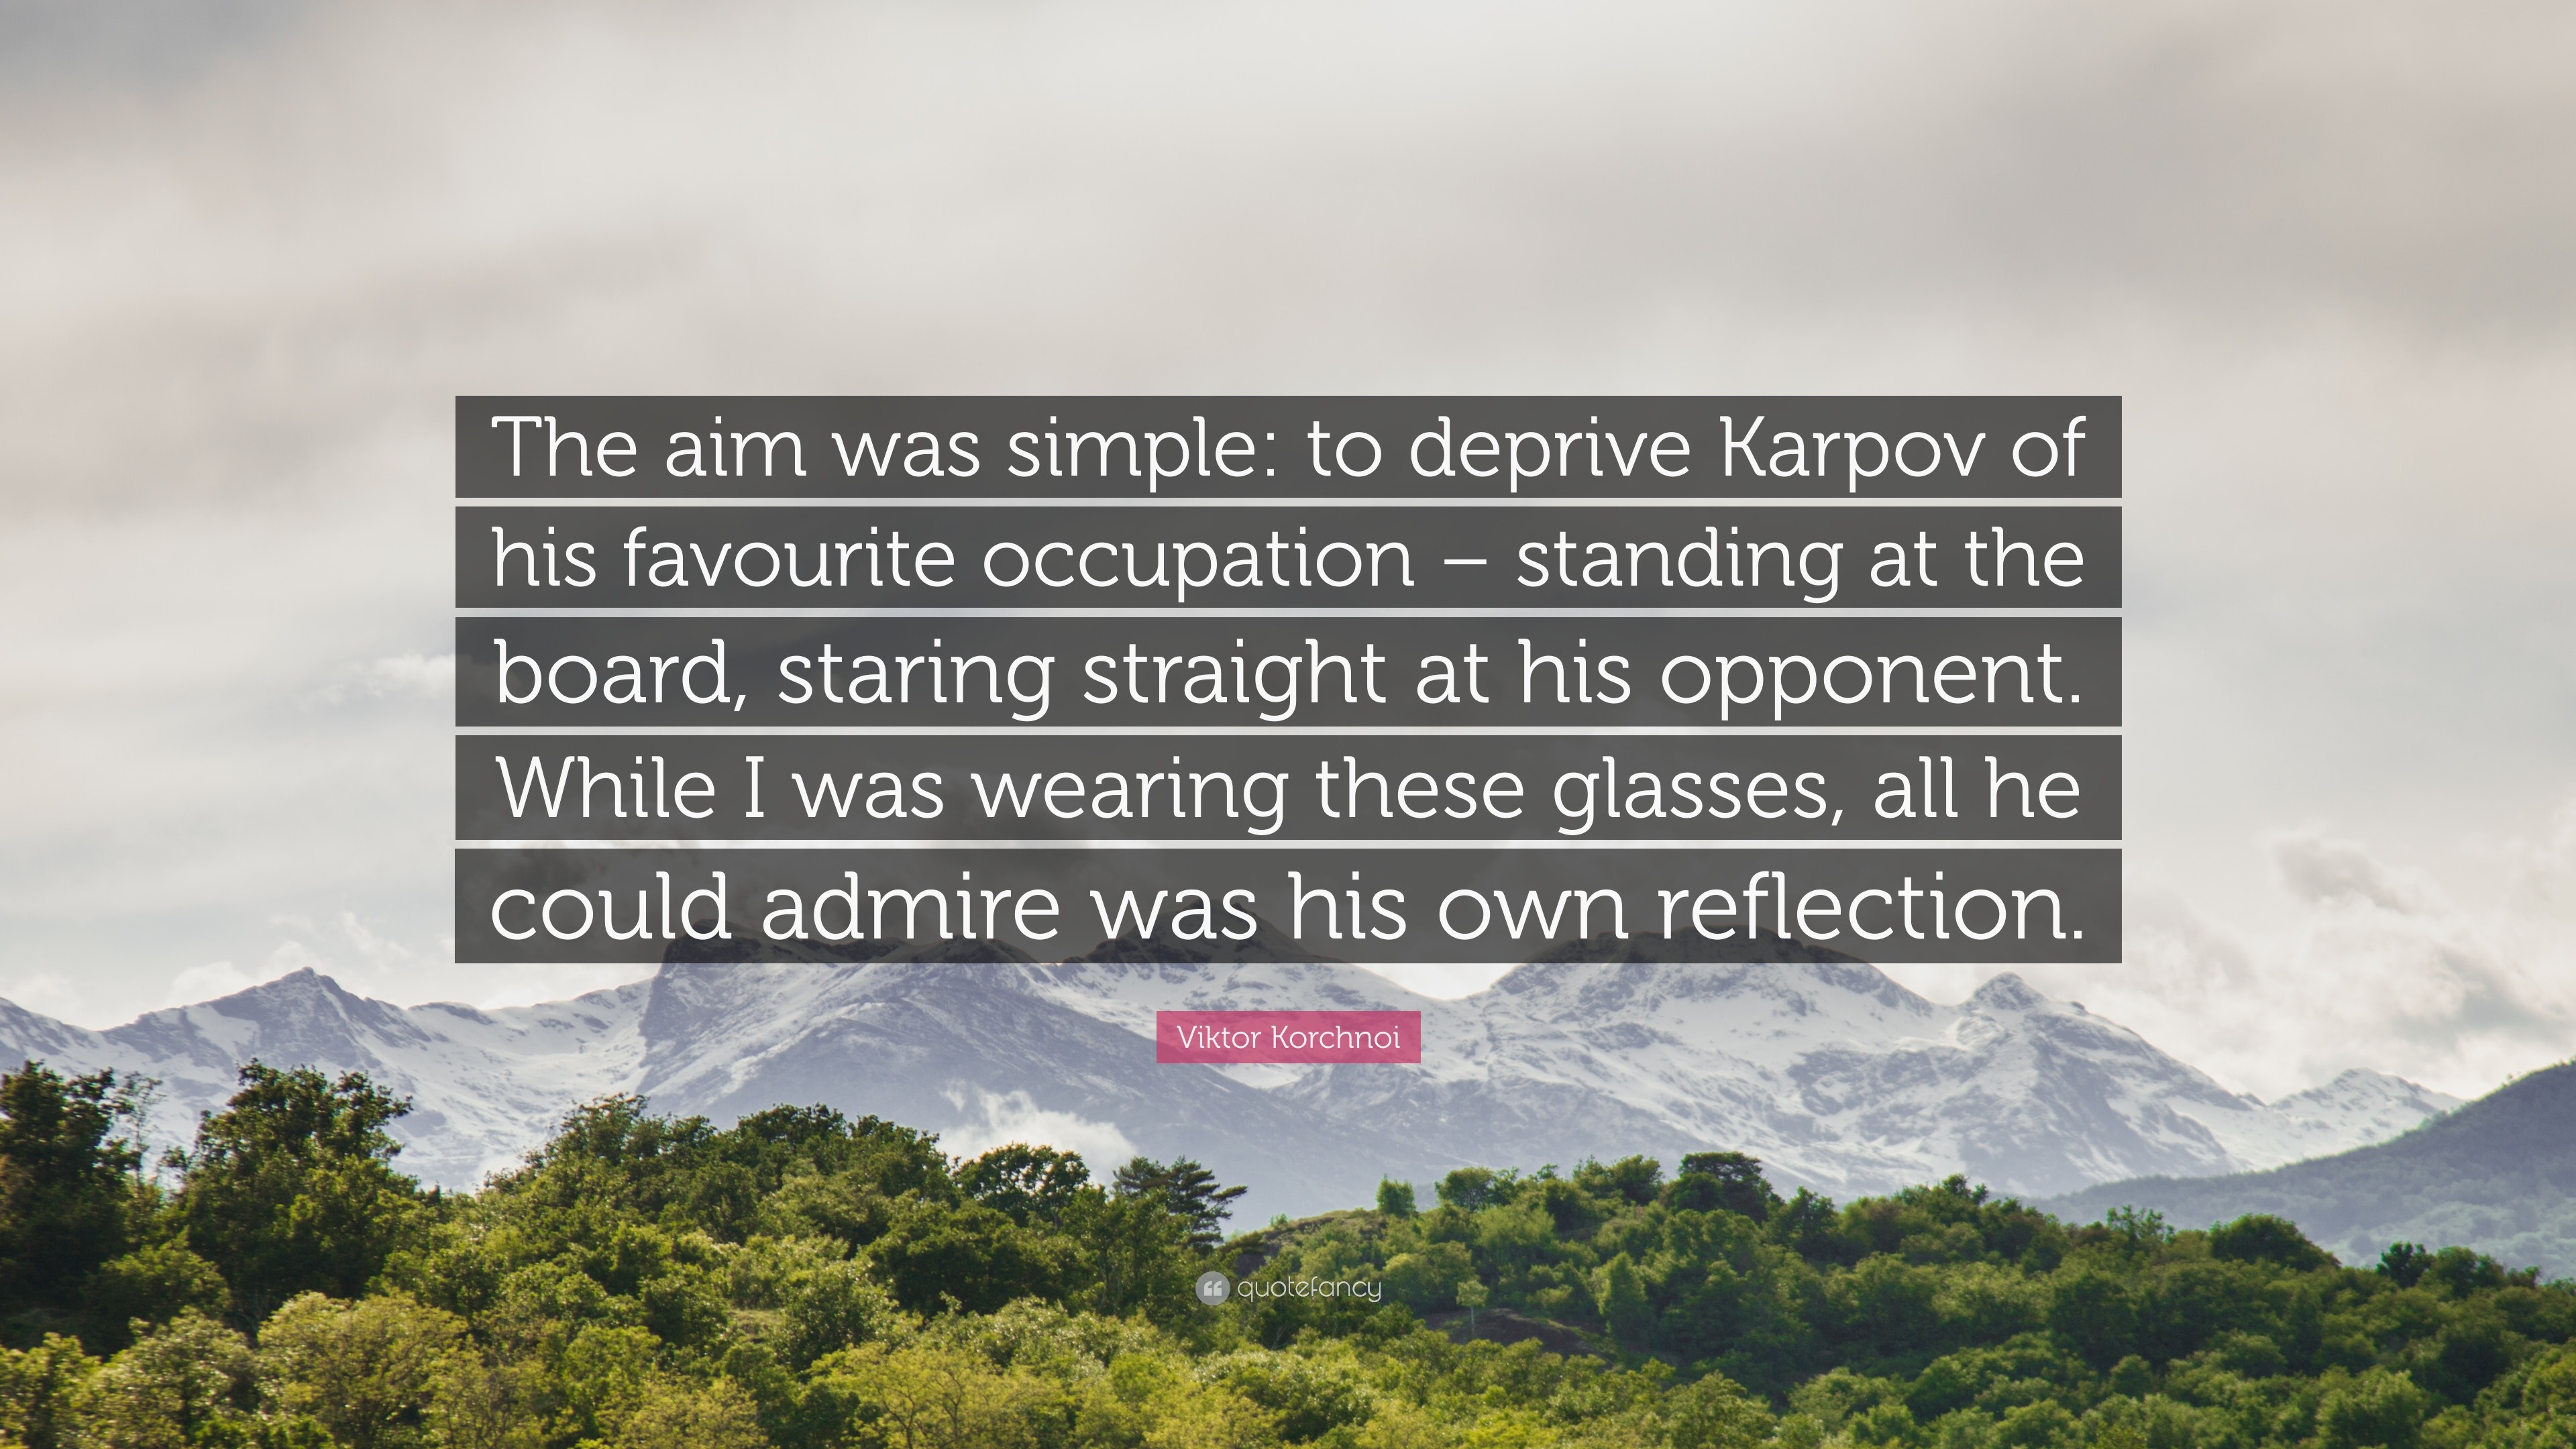 Viktor Korchnoi Quote: “The aim was simple: to deprive Karpov of his  favourite occupation – standing at the board, staring straight at his  oppon”